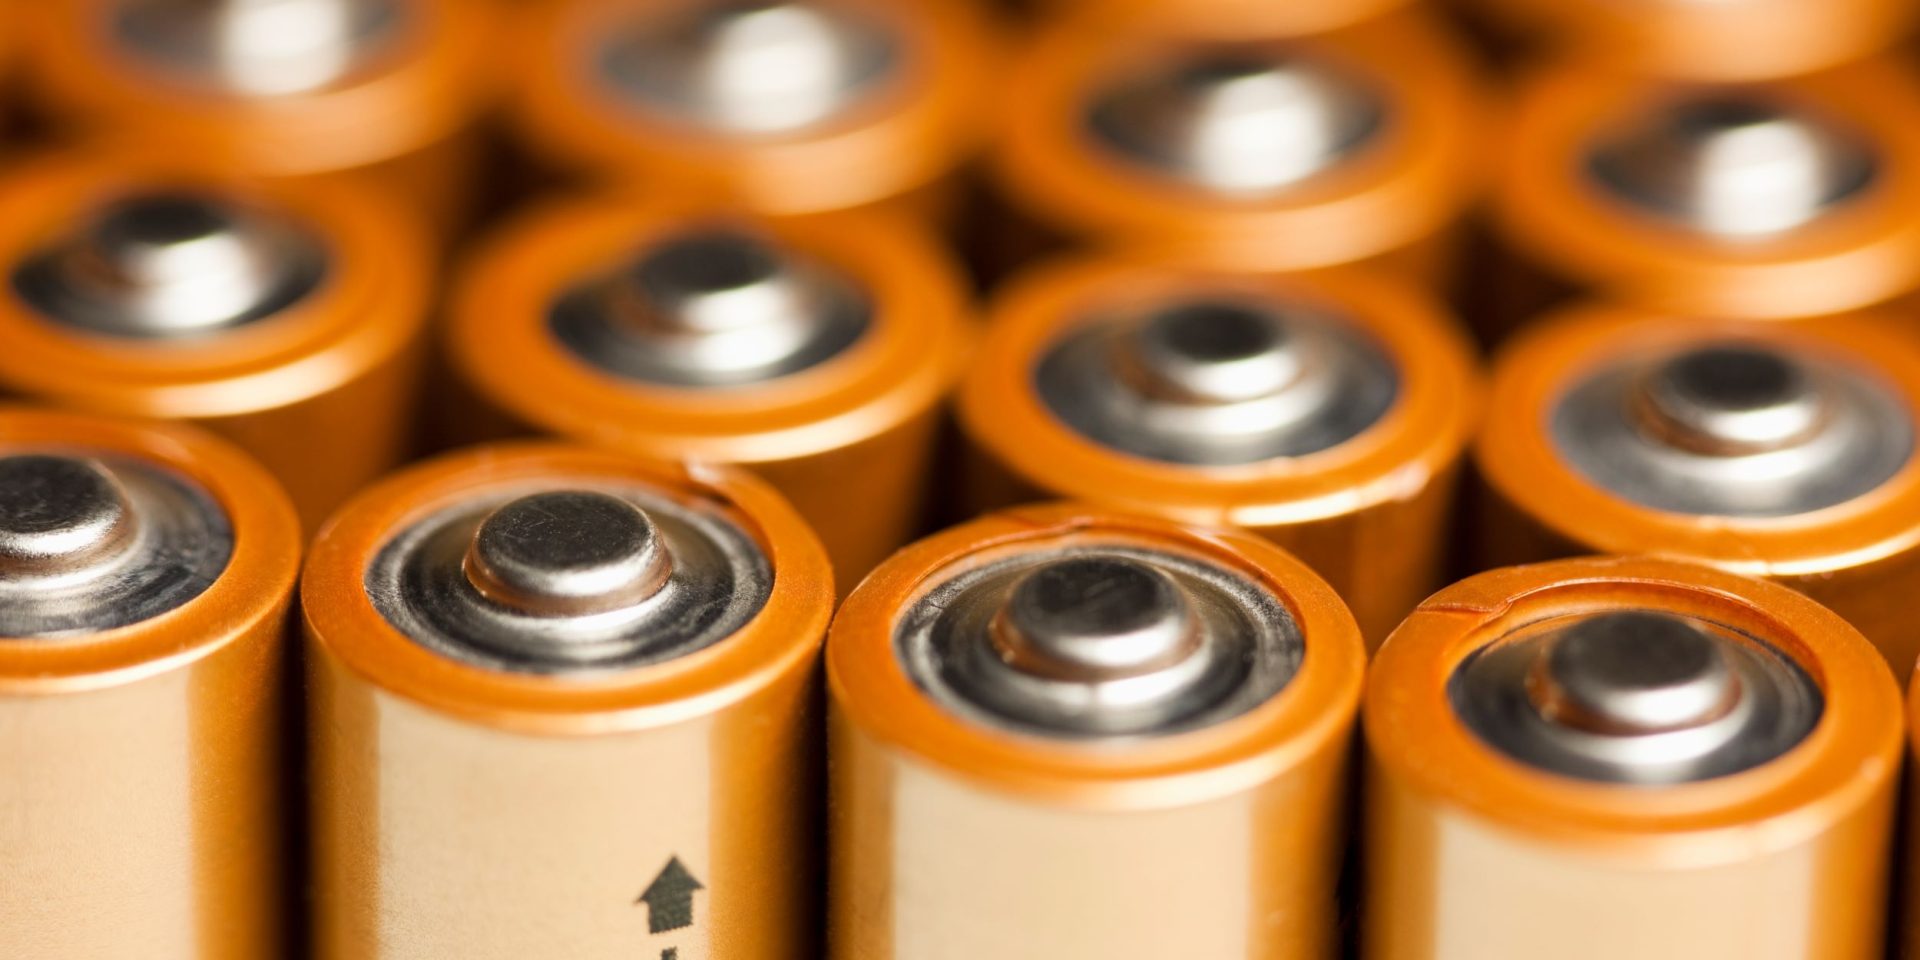 Challenges for the recycling of spent batteries